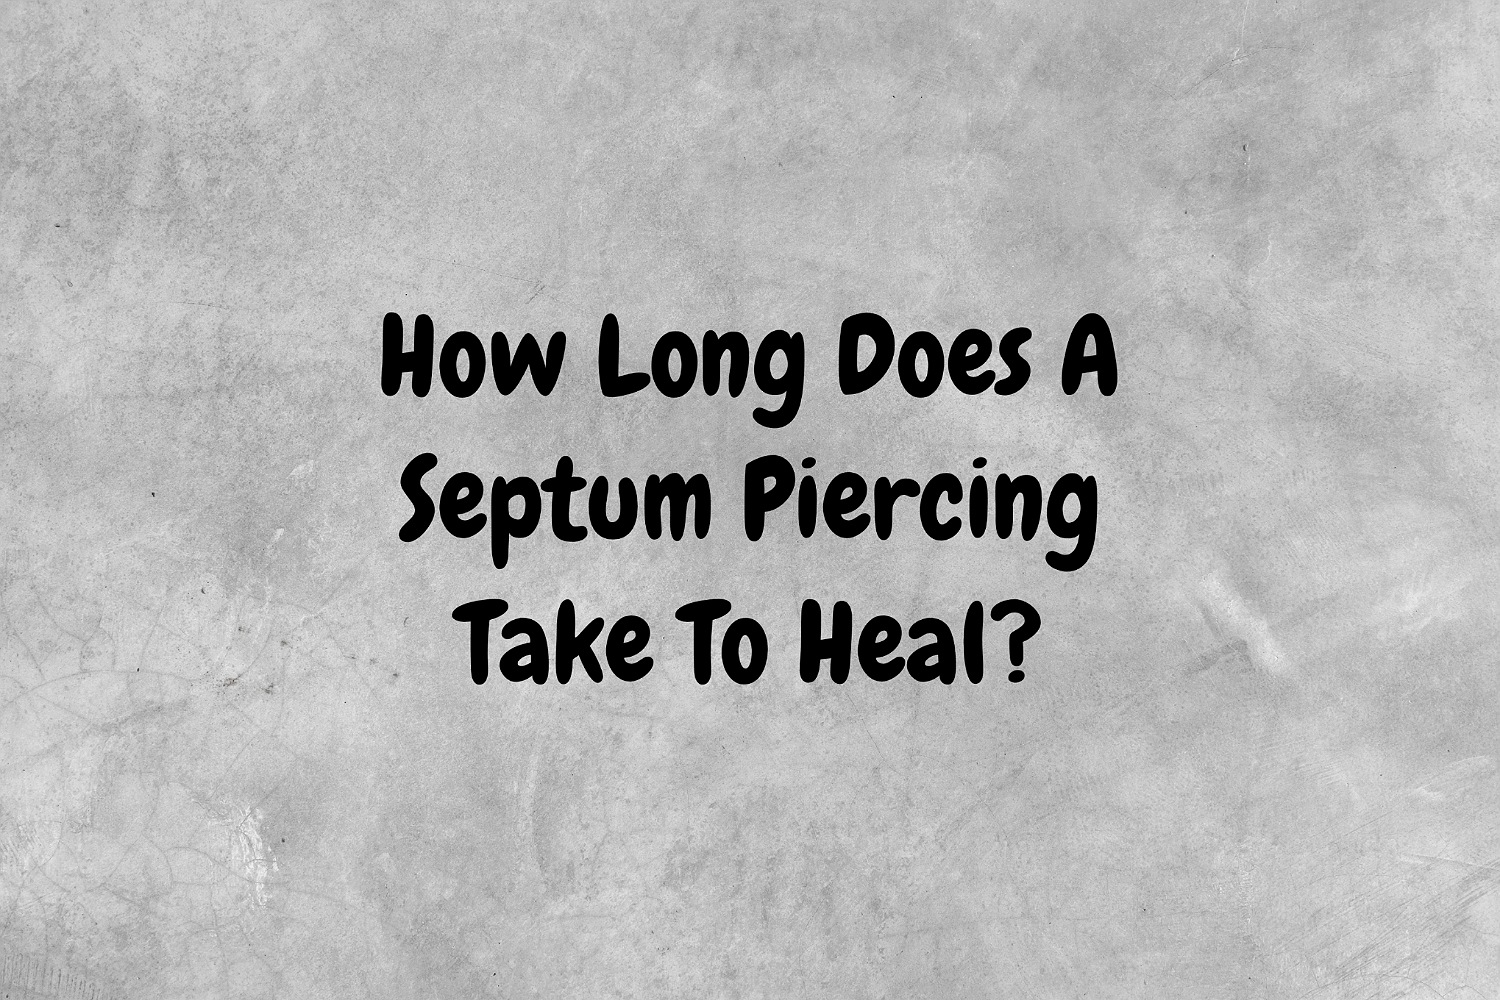 An image with a gray background that has black text proposing the question, "How long does a septum piercing take to heal?".